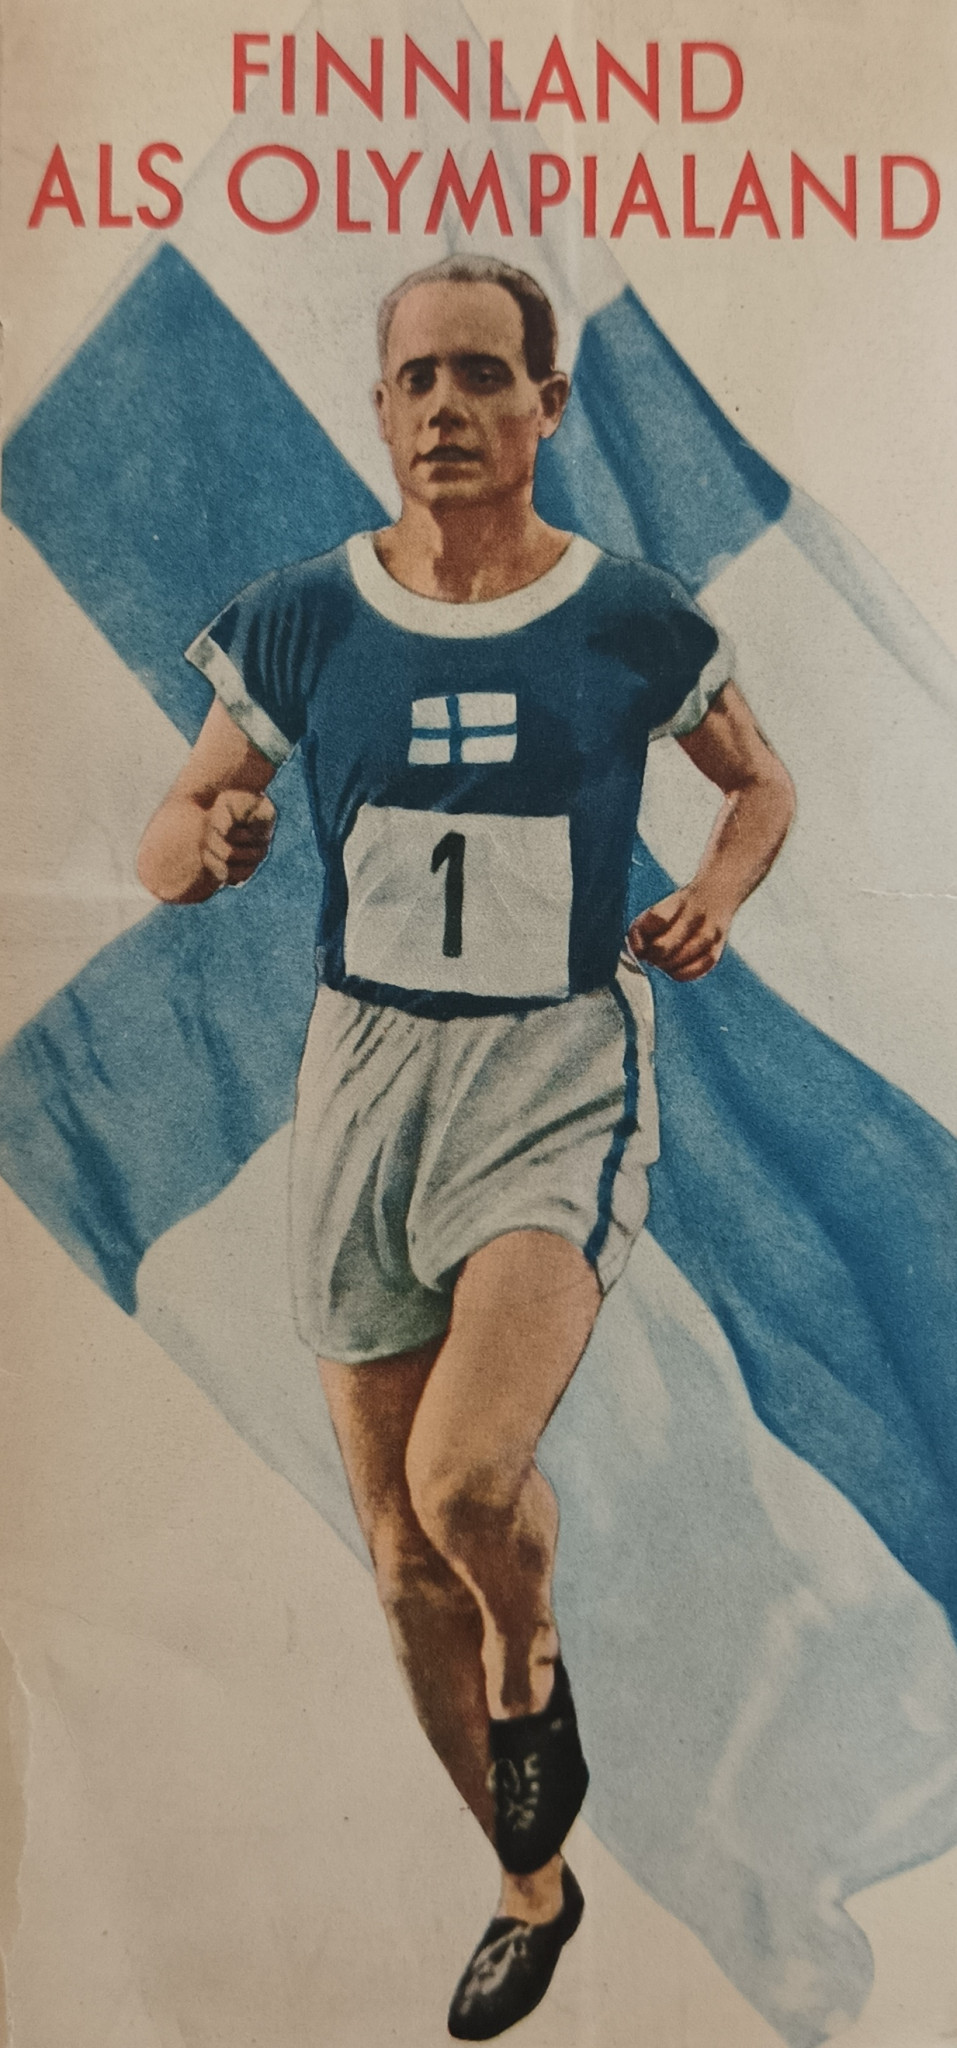 Publicity material for the Games represented Finland's rich heritage in athletics ©Helsinki 1940 Organising Committee